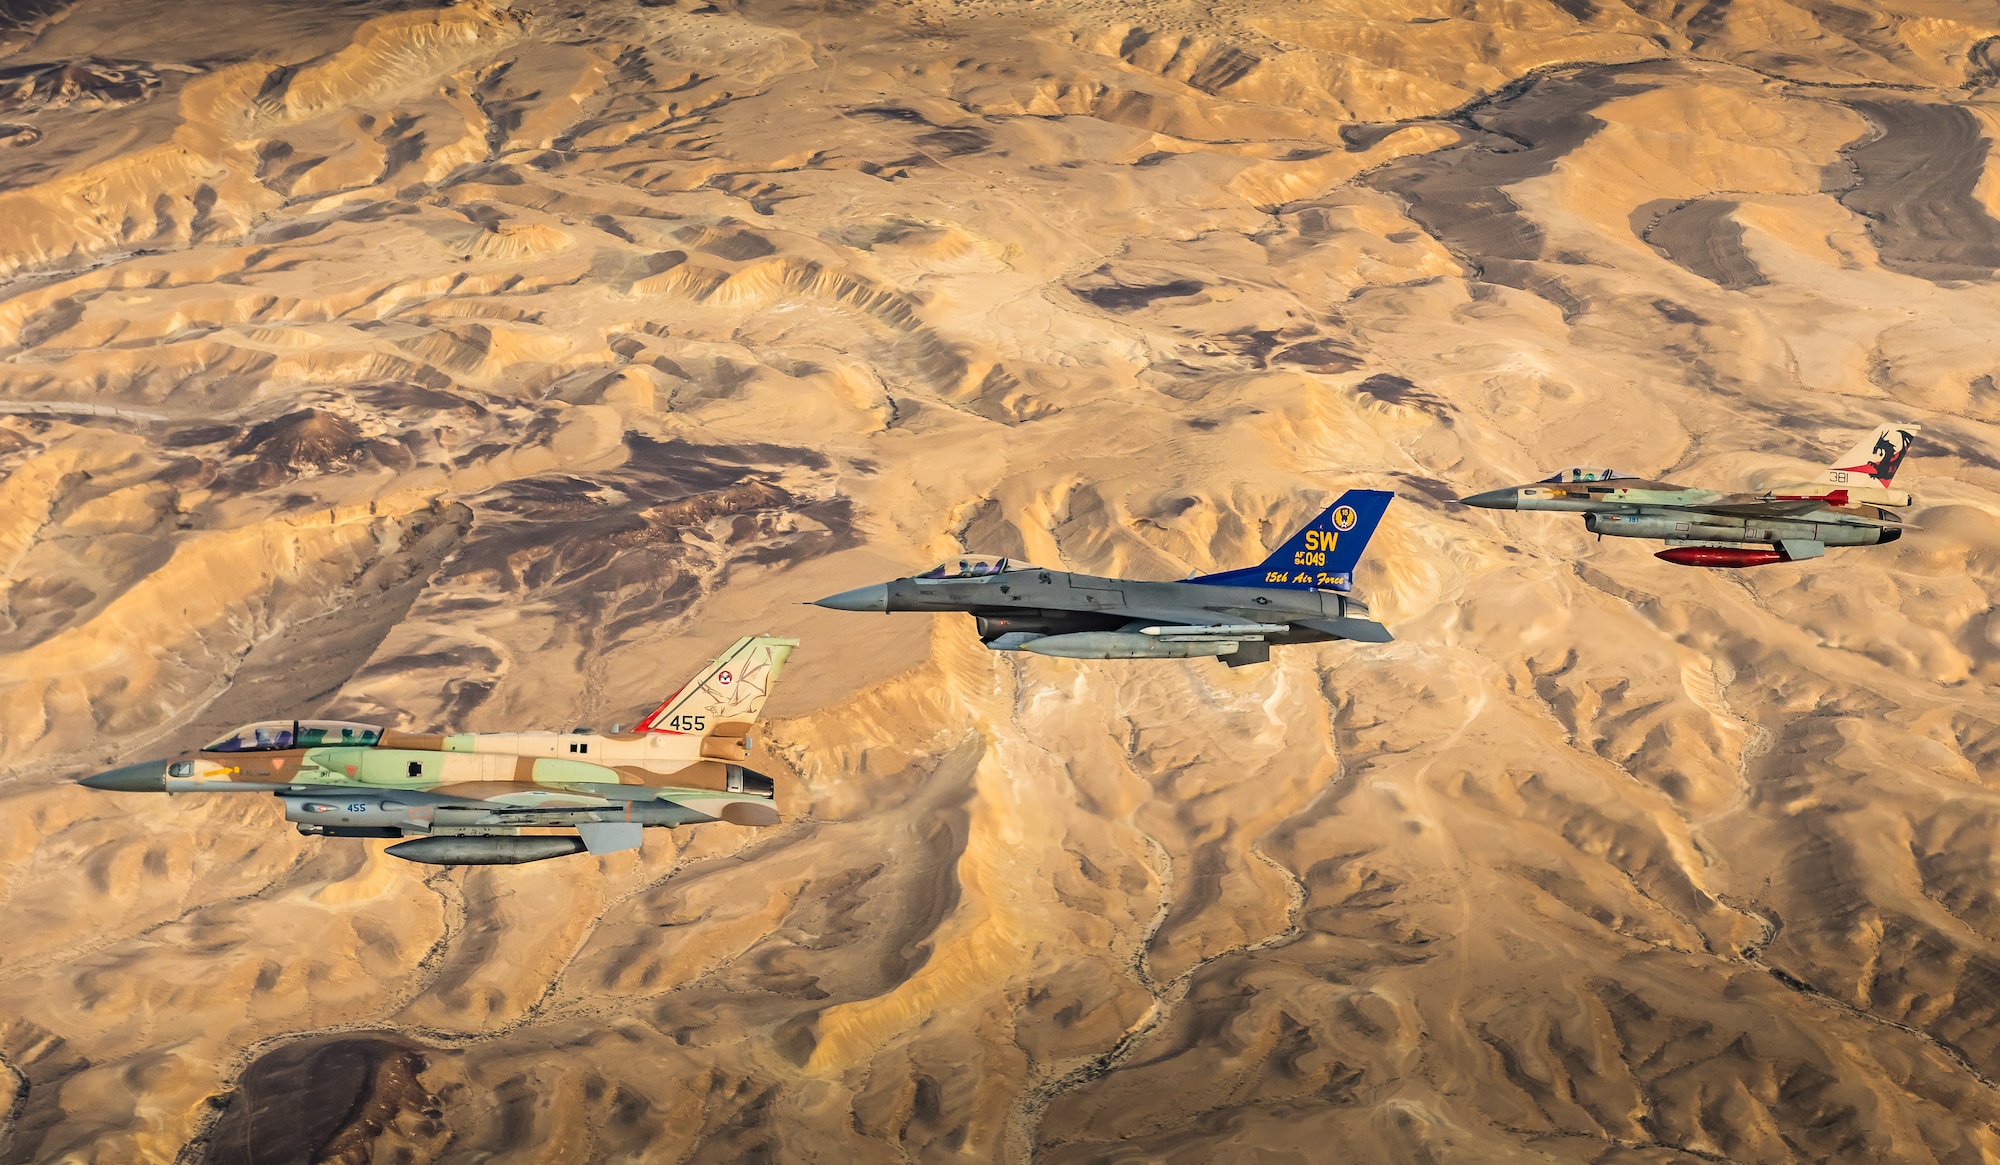 The U.S. Air Force 55th Expeditionary Fighter Squadron flies alongside the Israeli Air Force during Desert Falcon in Israel, Jan. 16, 2022. Desert Falcon is a joint international exercise in which the Israeli and U.S. aircrews flew wing-to-wing and trained for various aerial scenarios and strikes.